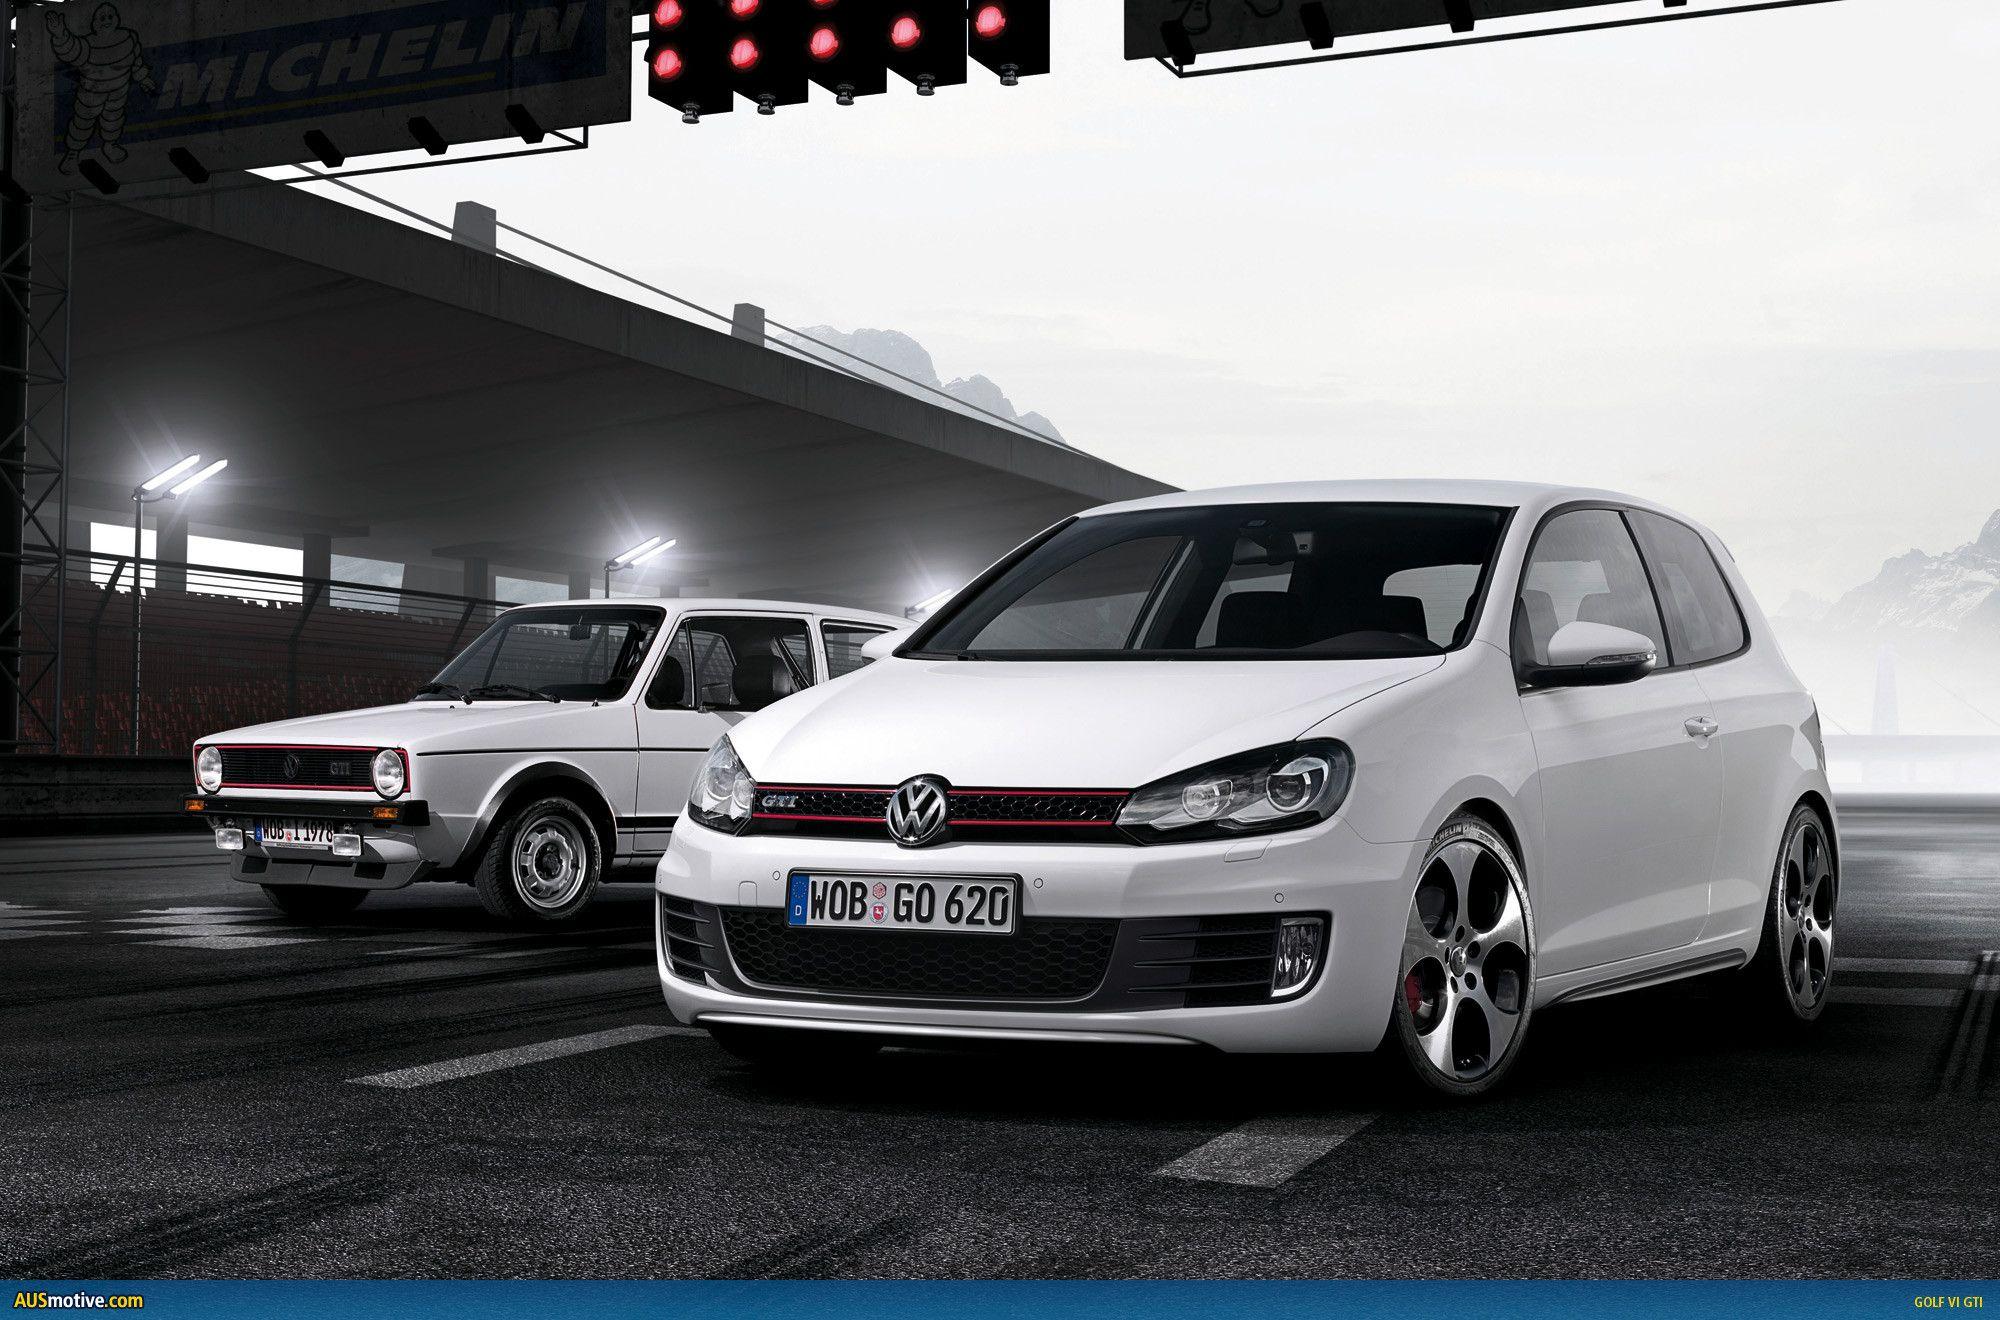 Vw Gti Wallpaper and Background